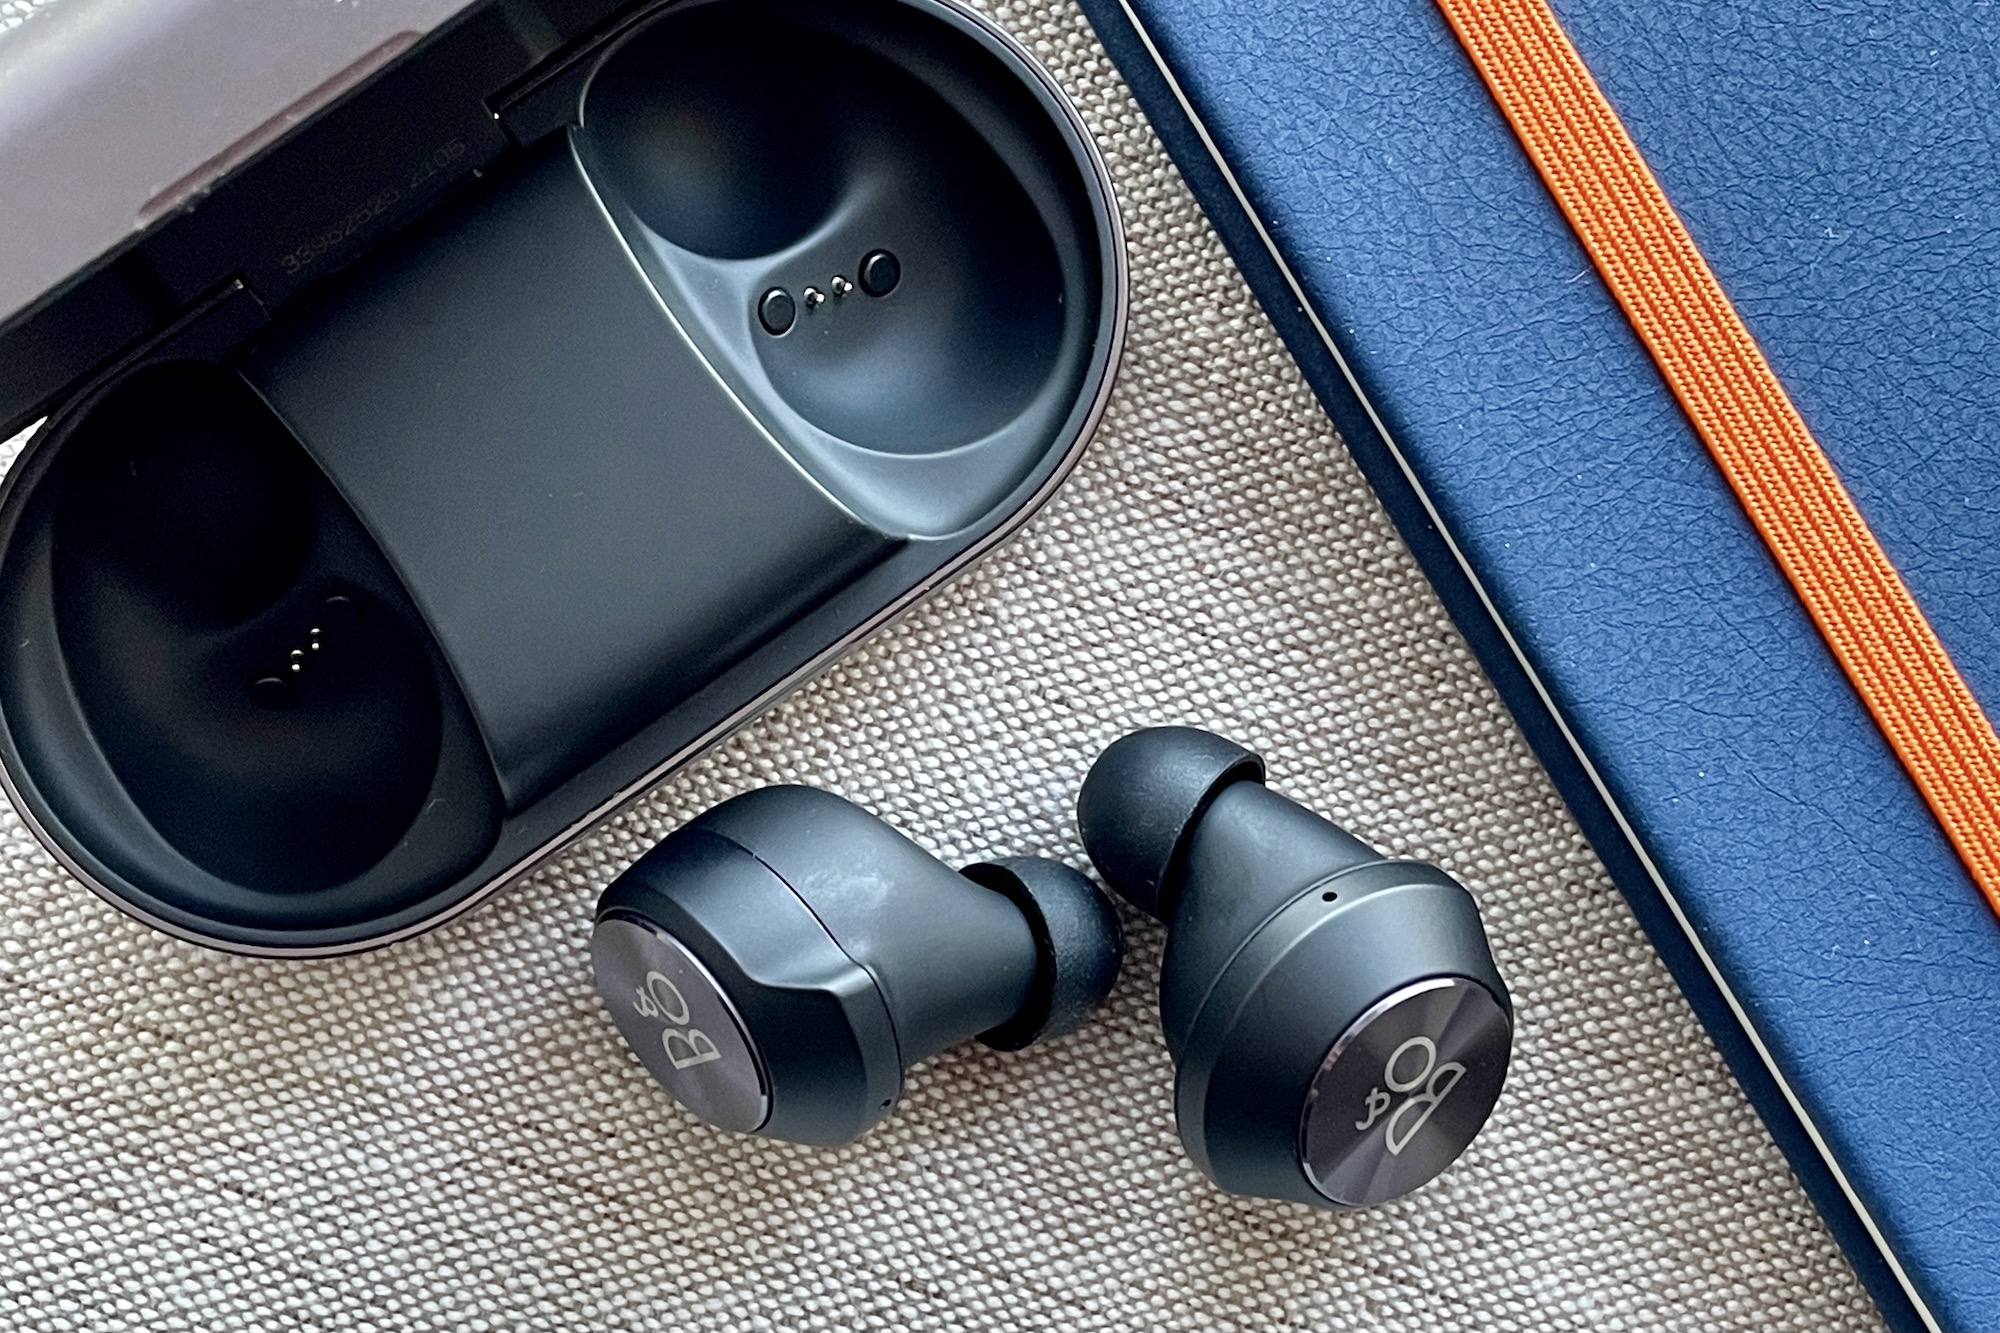 Beoplay EQ earbuds out the case, seen from the side.